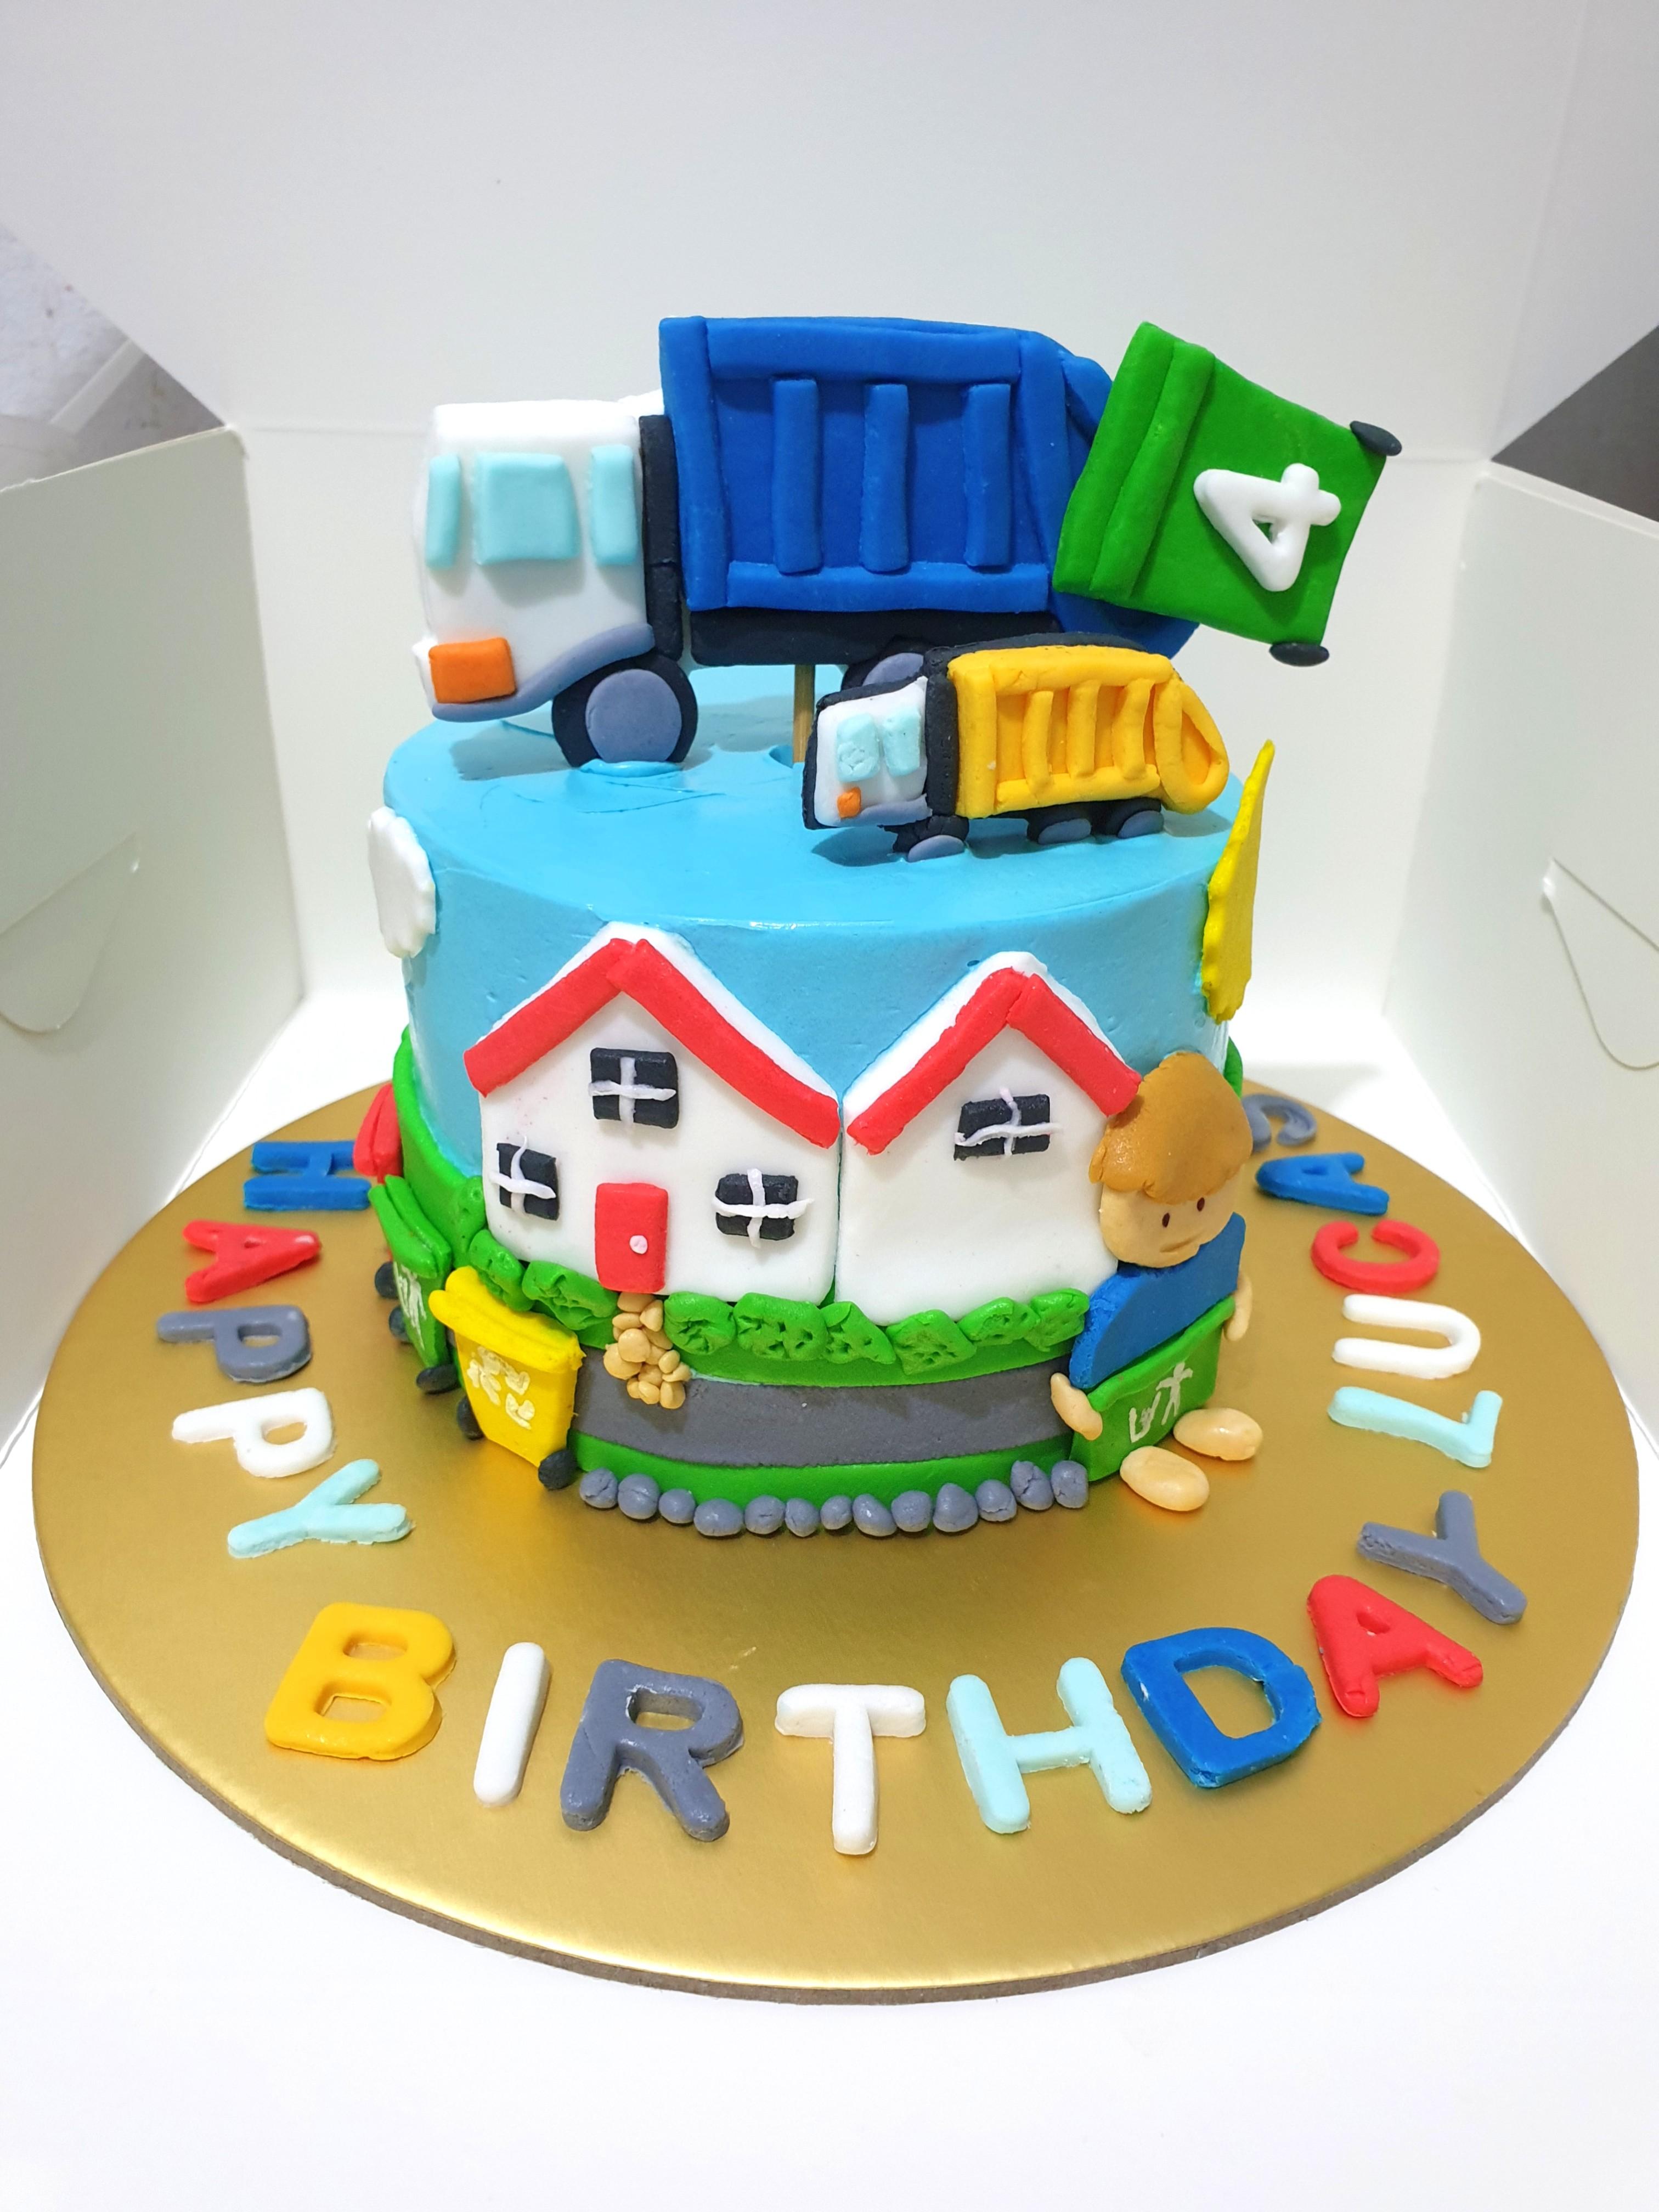 Garbage truck cake!🚛 I love the... - M an M Sweet Treats | Facebook